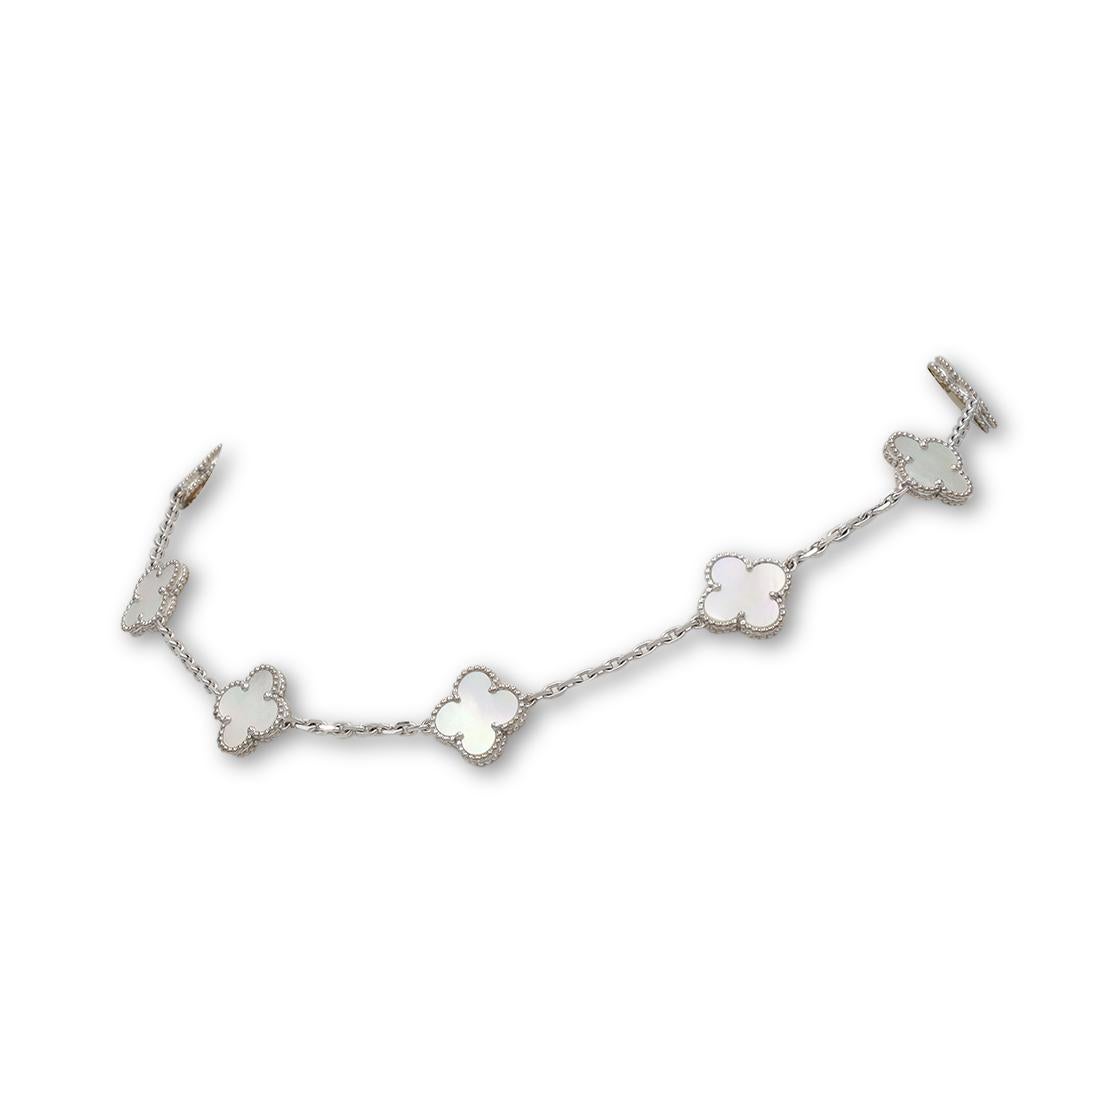 Authentic Van Cleef & Arpels 'Vintage Alhambra' necklace crafted in 18 karat white gold featuring 10 clover leaf inspired motifs of carved mother-of-pearl gemstones. Signed VCA, Au750, with hallmarks and serial number. Necklace is not presented with